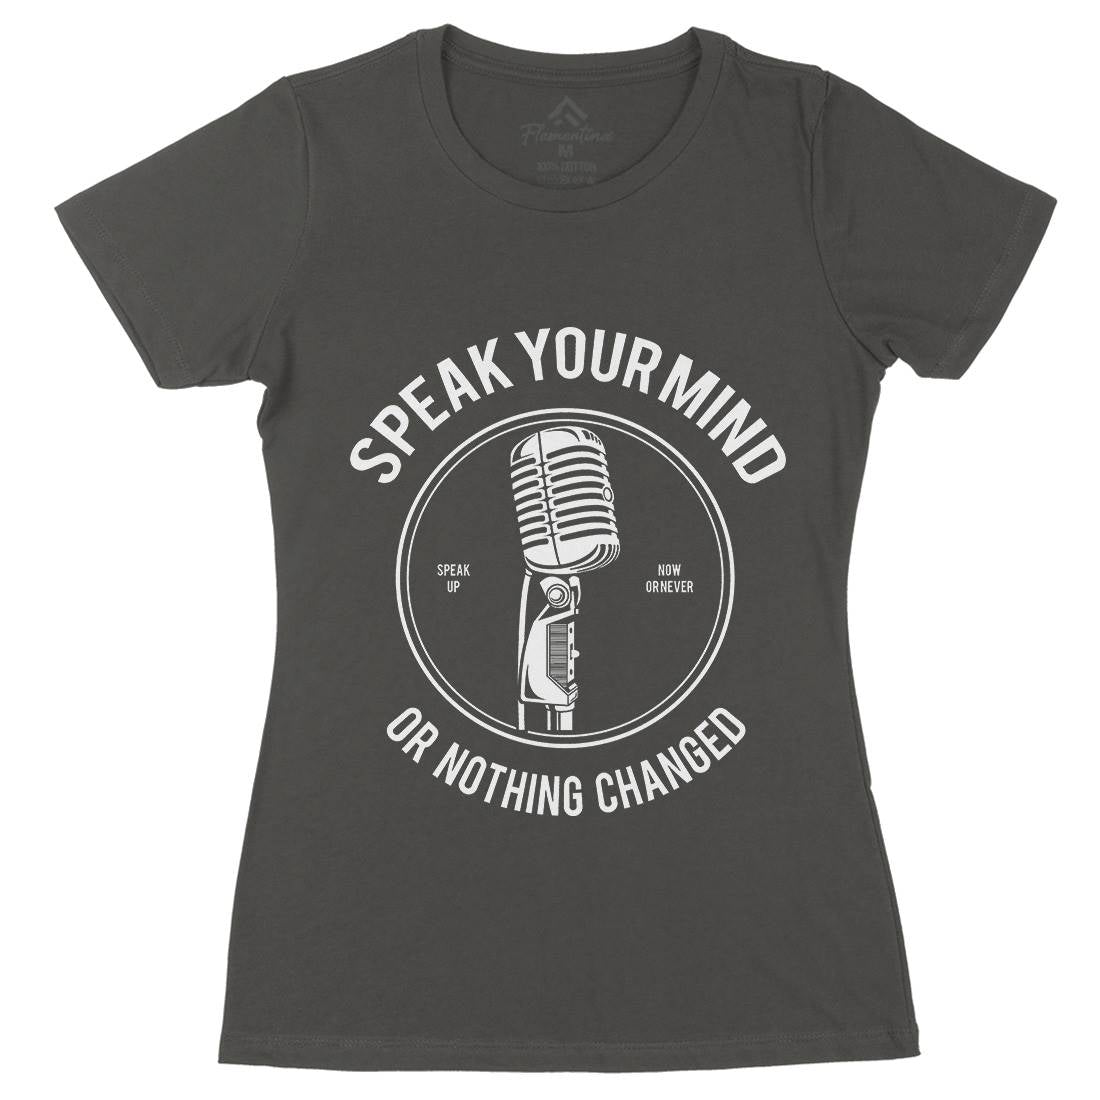 Speak Your Mind Womens Organic Crew Neck T-Shirt Quotes A152